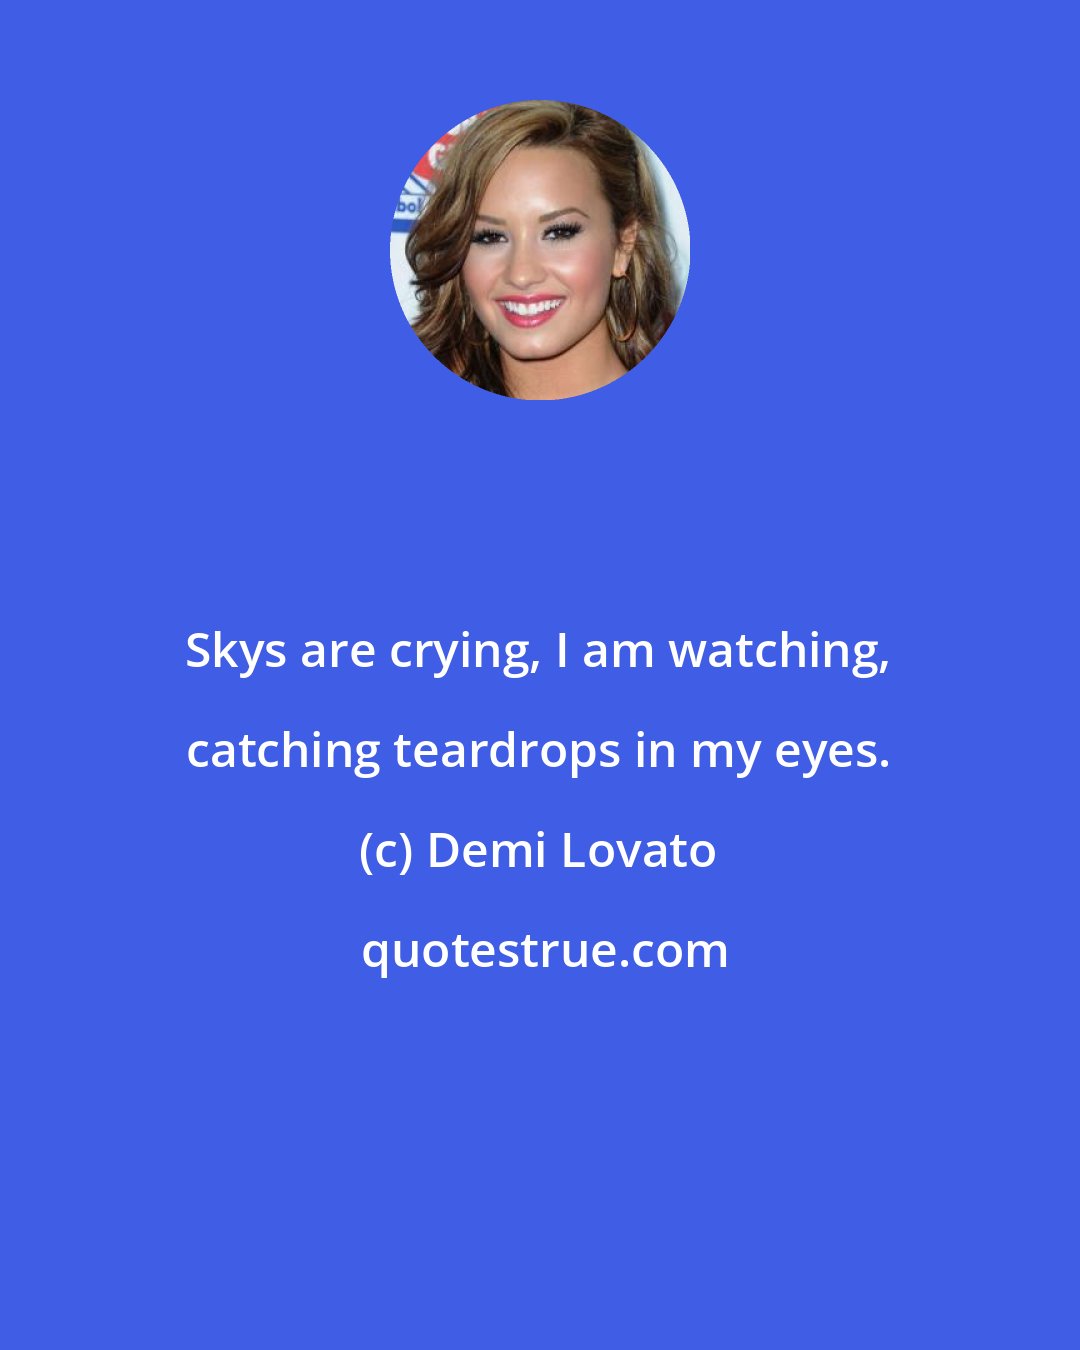 Demi Lovato: Skys are crying, I am watching, catching teardrops in my eyes.